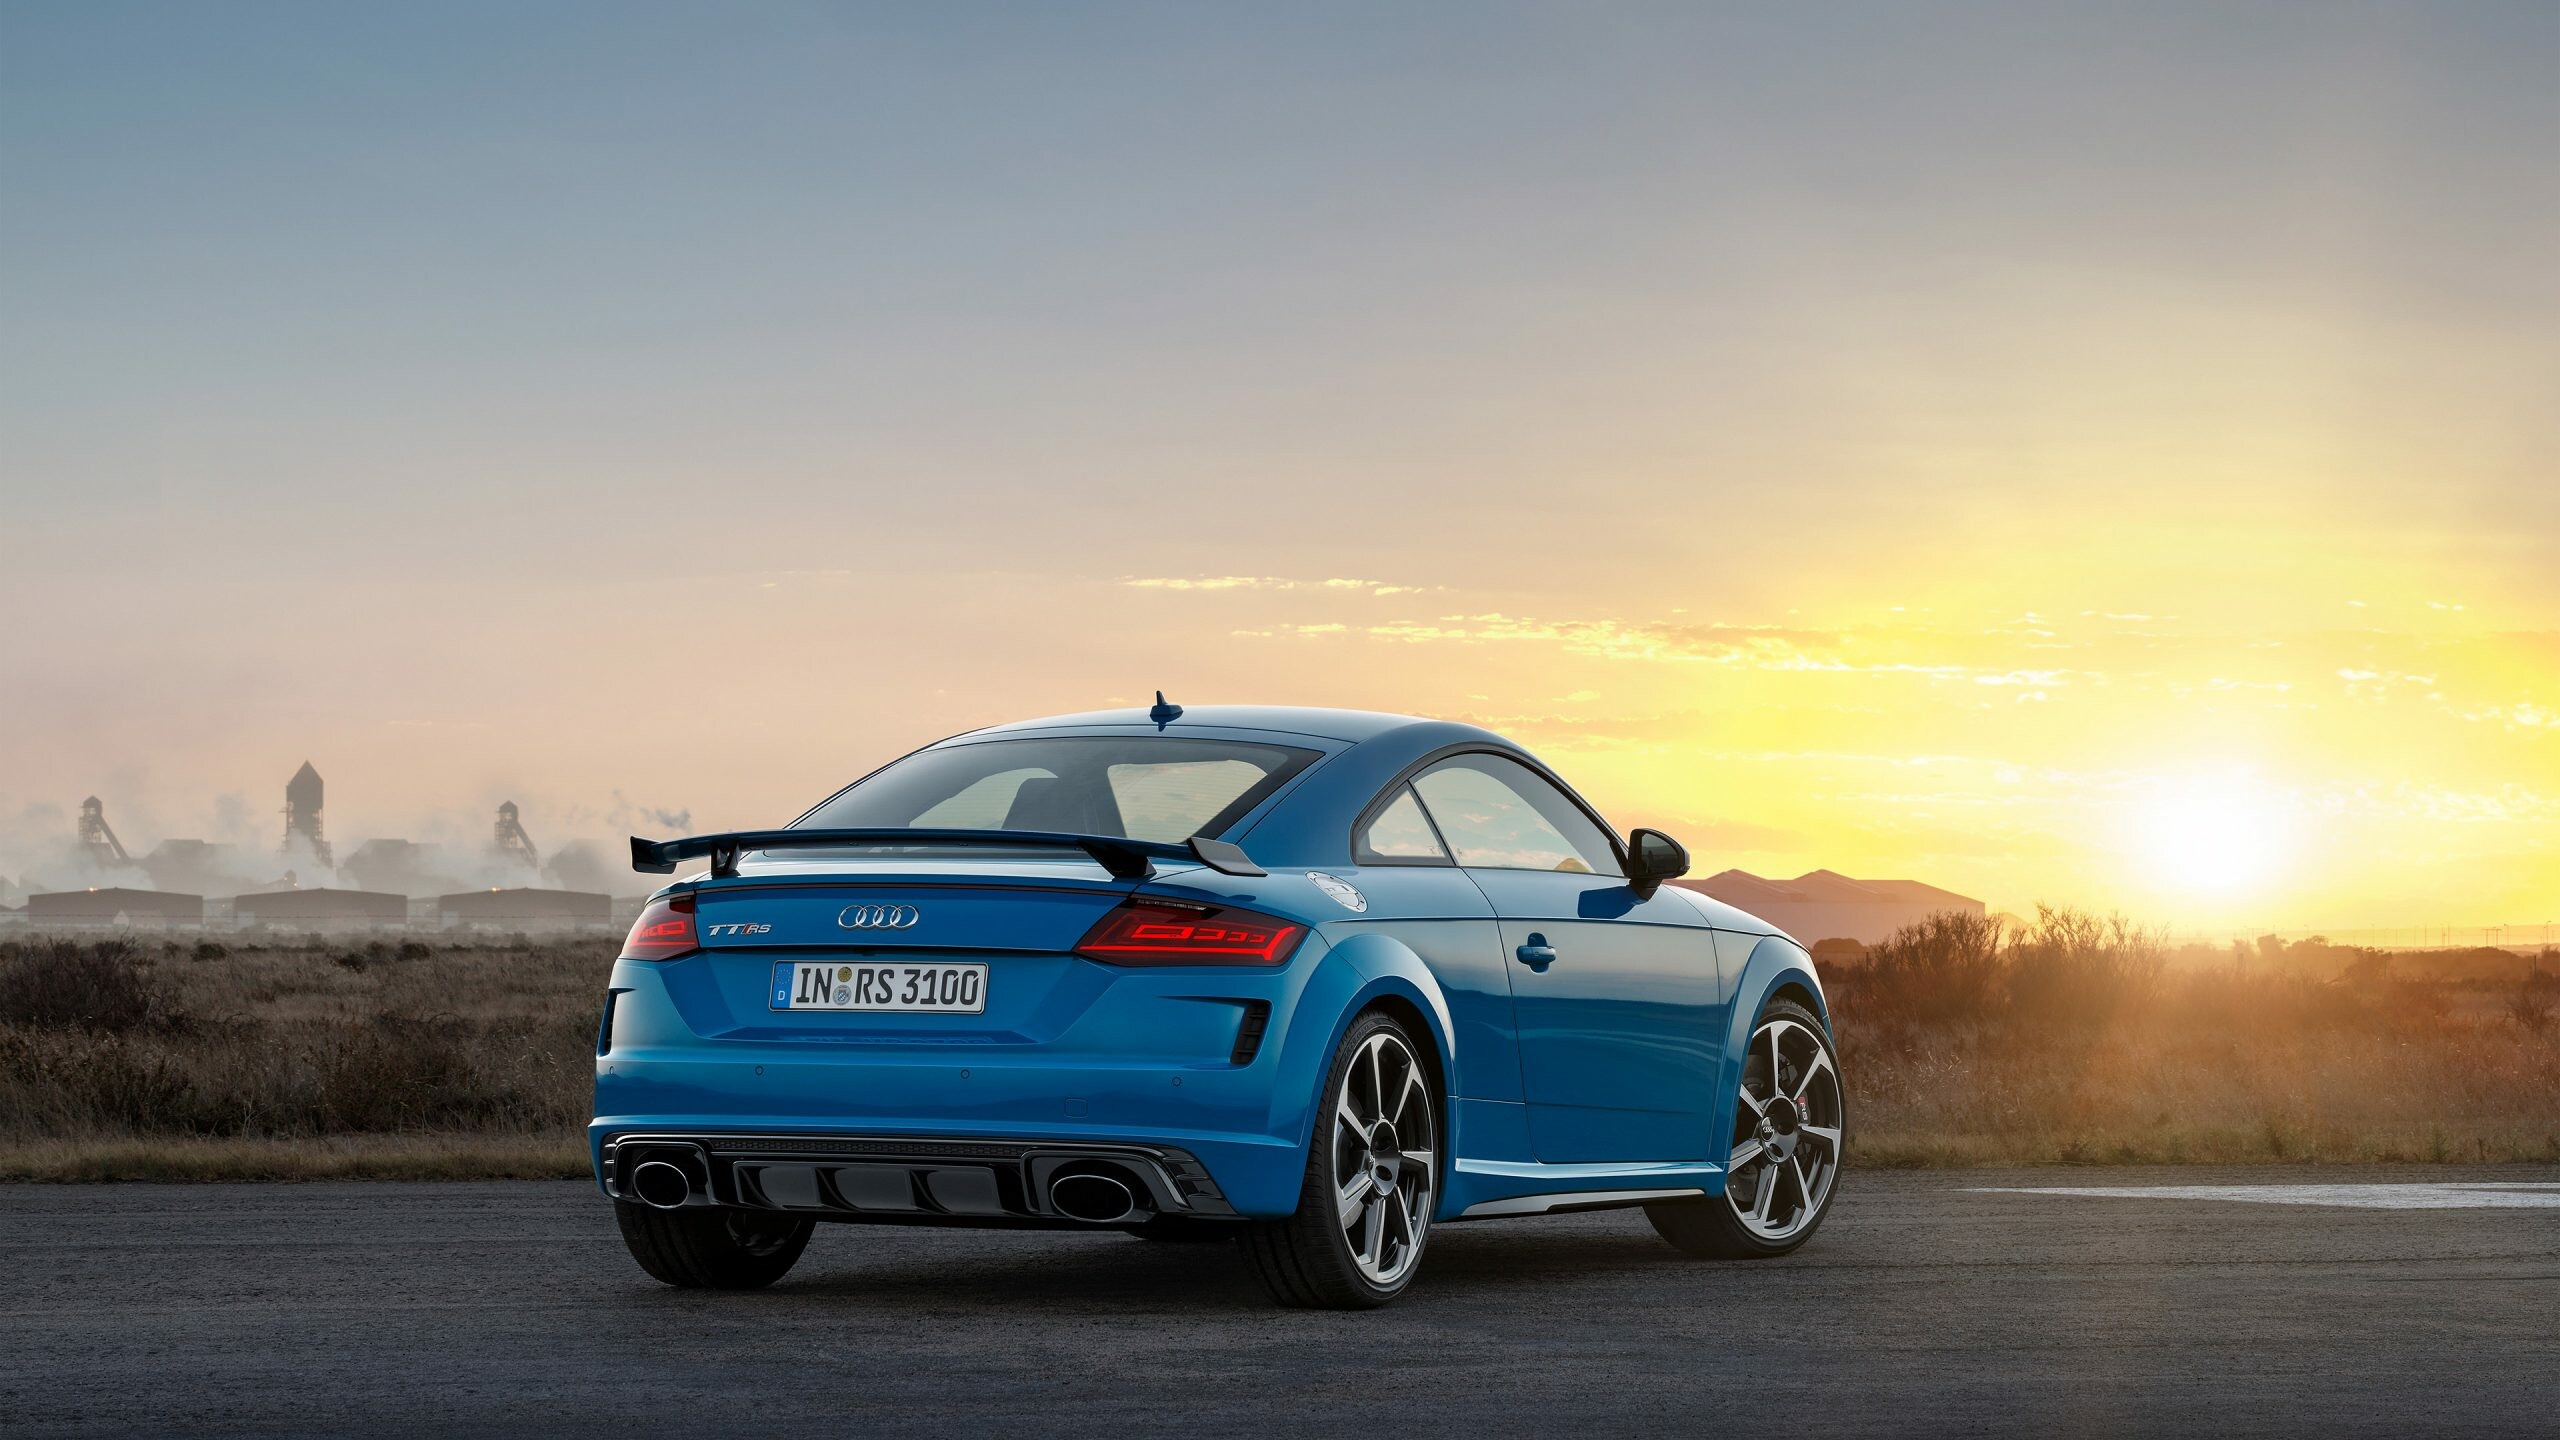 Audi: One of today's most successful luxury car brands, TT RS. 2560x1440 HD Wallpaper.